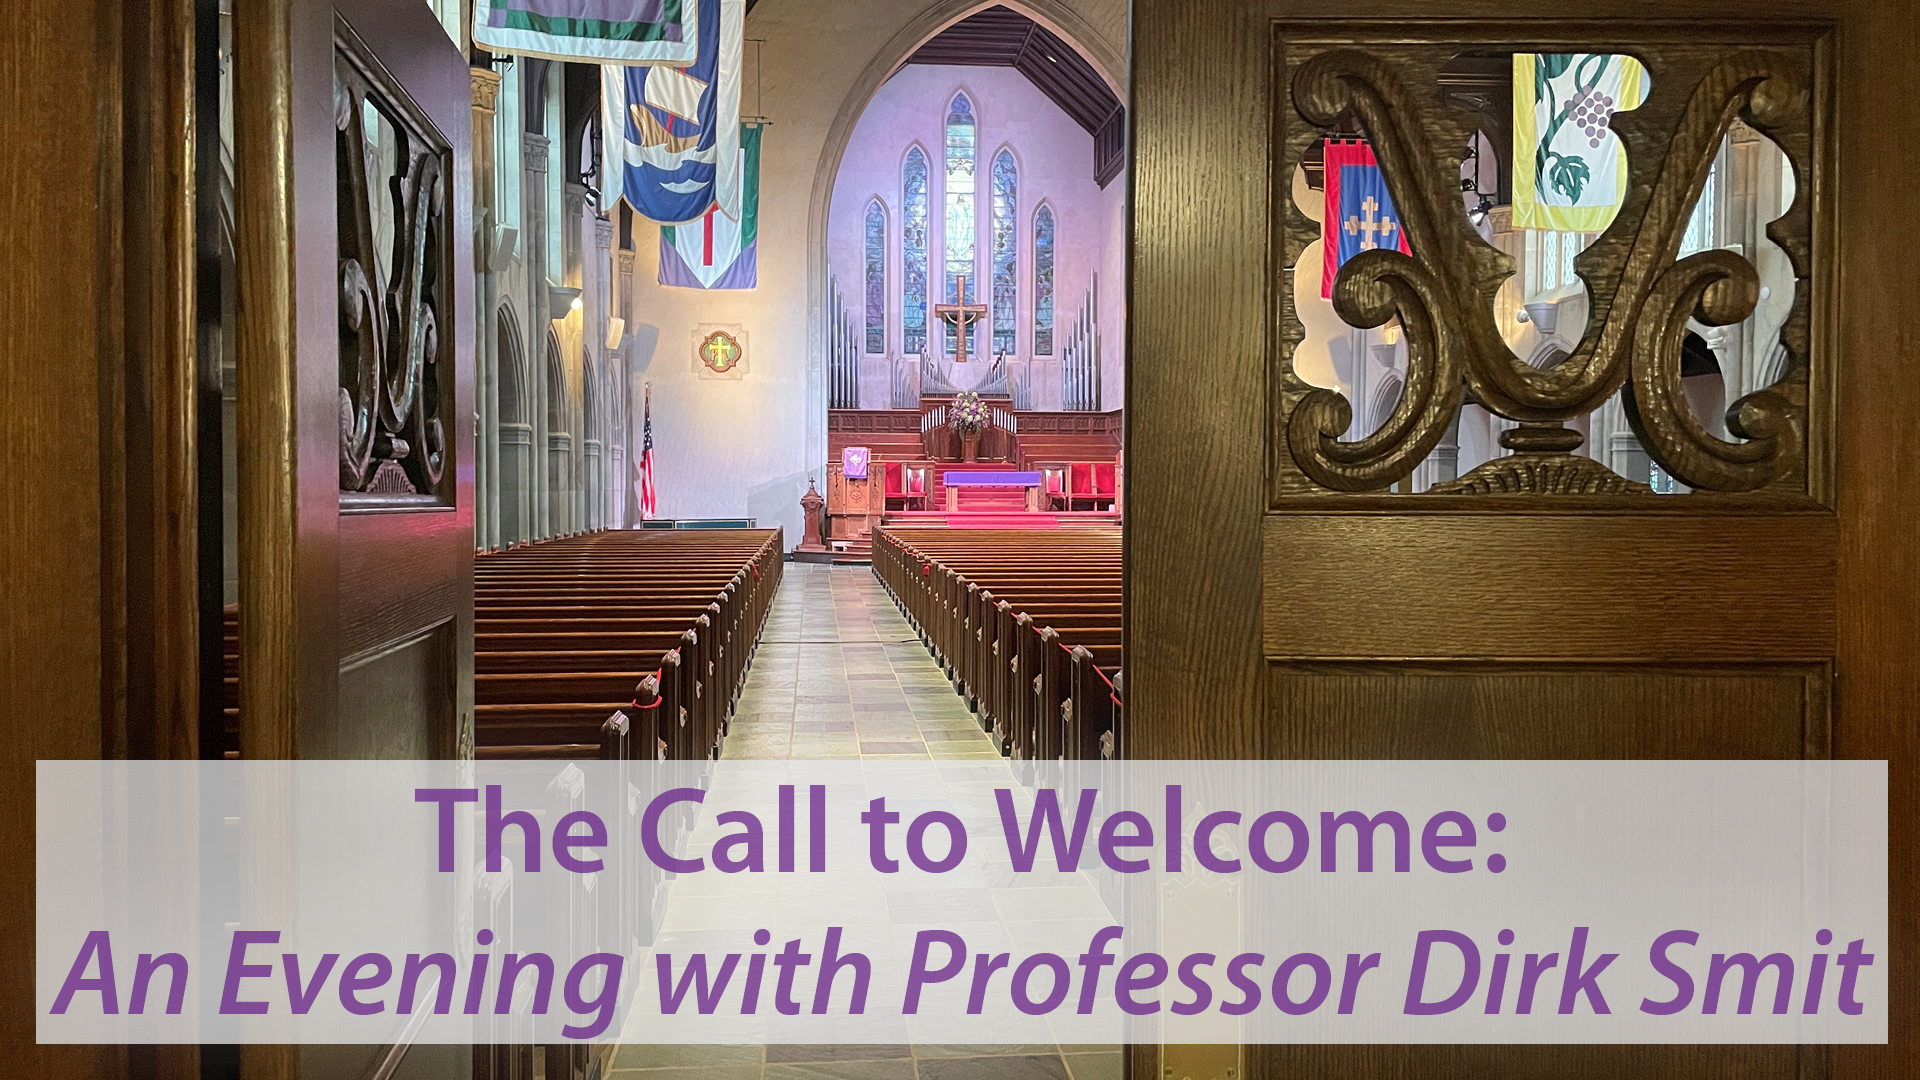 The Call to Welcome: An Evening with Professor Dirk Smit
Watch the video of this engaging conversation from March 25, 2021.
